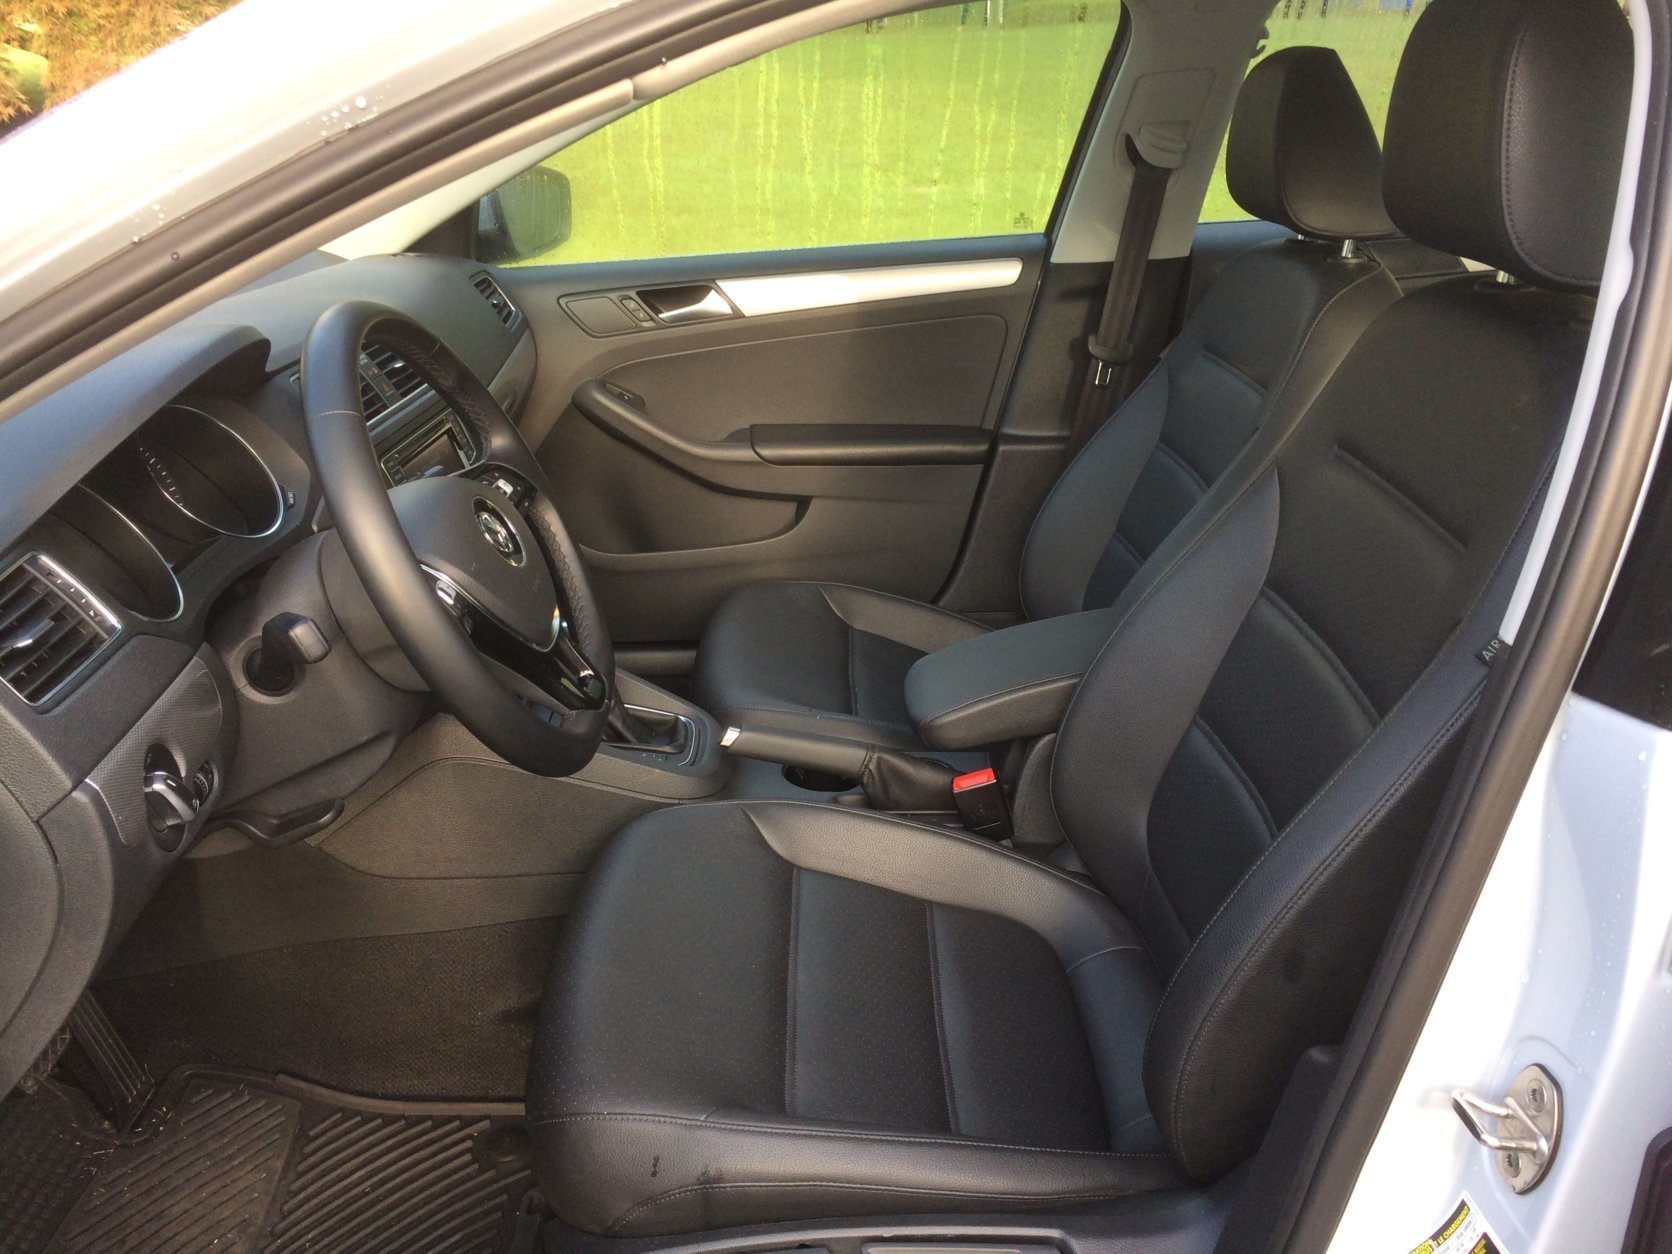 Parris said the leatherette-looking heated seats are comfortable enough for long drives. (WTOP/Mike Parris) 